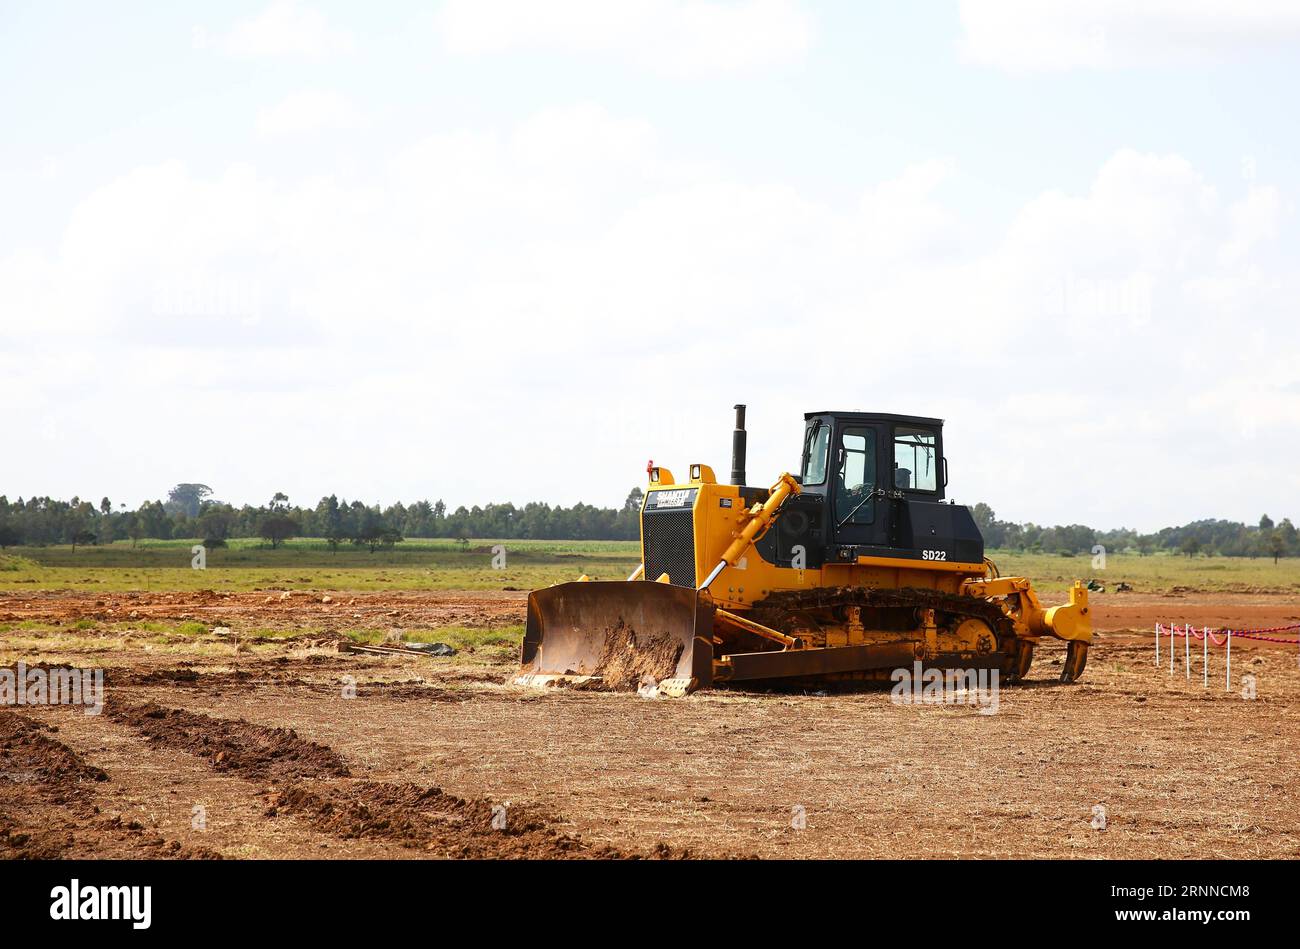 (170707) -- ELDORET(KENYA), July 7, 2017 -- A bulldozer is seen at the launching ceremony of the Special Economic Zone project in Eldoret, Kenya, on July 7, 2017. Kenya on Friday launched a Special Economic Zone (SEZ) project that is expected to attract about 2 billion U.S. dollars of foreign investments. The project is a joint venture between Kenyan-based company Africa Economic Zone and China s Guangdong New South Group. ) KENYA-ELDORET-SPECIAL ECONOMIC ZONE-LAUNCHING CEREMONY PanxSiwei PUBLICATIONxNOTxINxCHN   Eldoret Kenya July 7 2017 a Bulldozers IS Lakes AT The Launching Ceremony of The Stock Photo